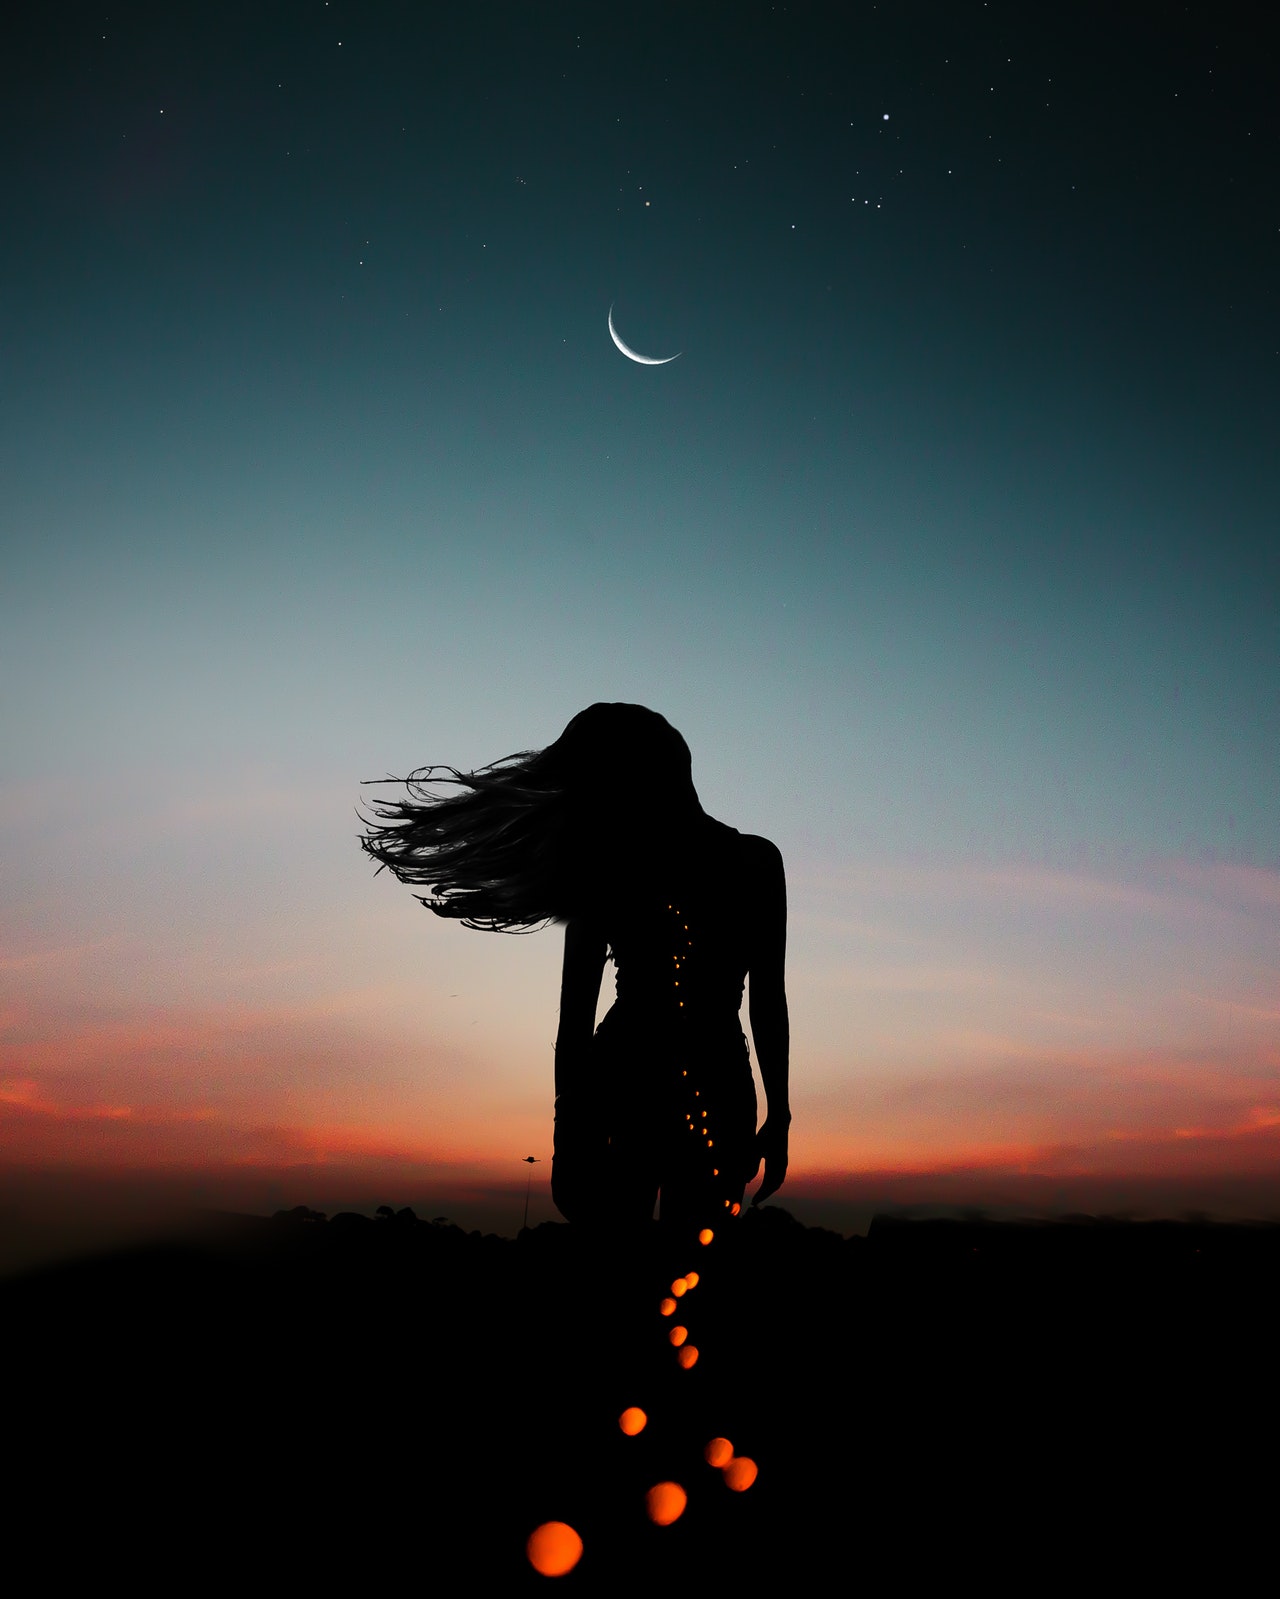 New-Moon-Woman-silhouette-Photo by luizclas from Pexels